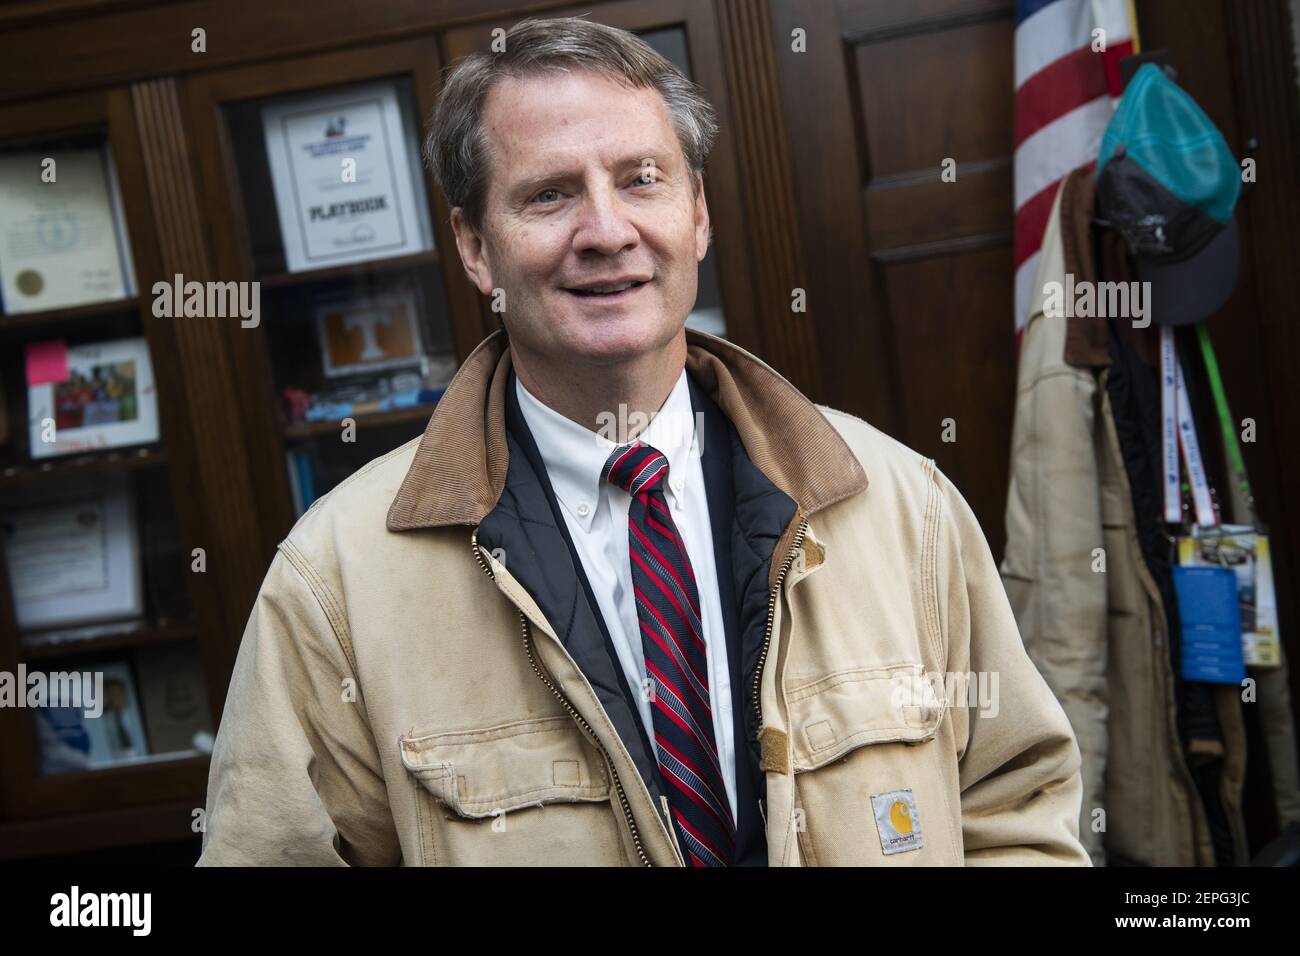 UNITED STATES - DECEMBER 19: Rep. Tim Burchett, R-Tenn., is pictured with his Carhartt jacket in Longworth Building on Thursday, December 19, 2019. (Photo By Tom Williams/CQ Roll Call/Sipa USA) Stock Photo